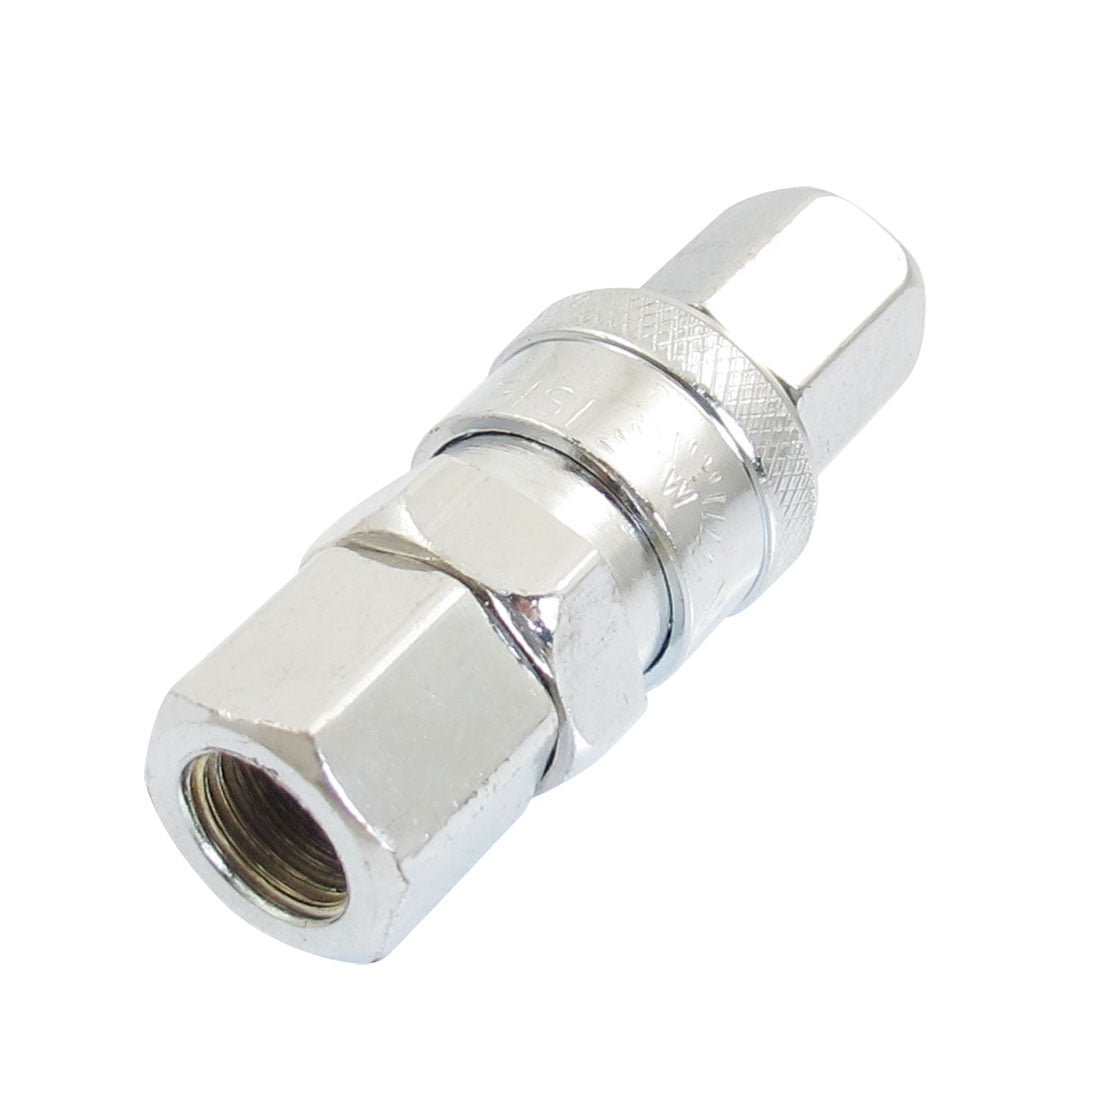 AIR LINE HOSE COMPRESSOR FITTING CONNECTOR QUICK RELEASE SET MALE 1/4" BSP 2PC 